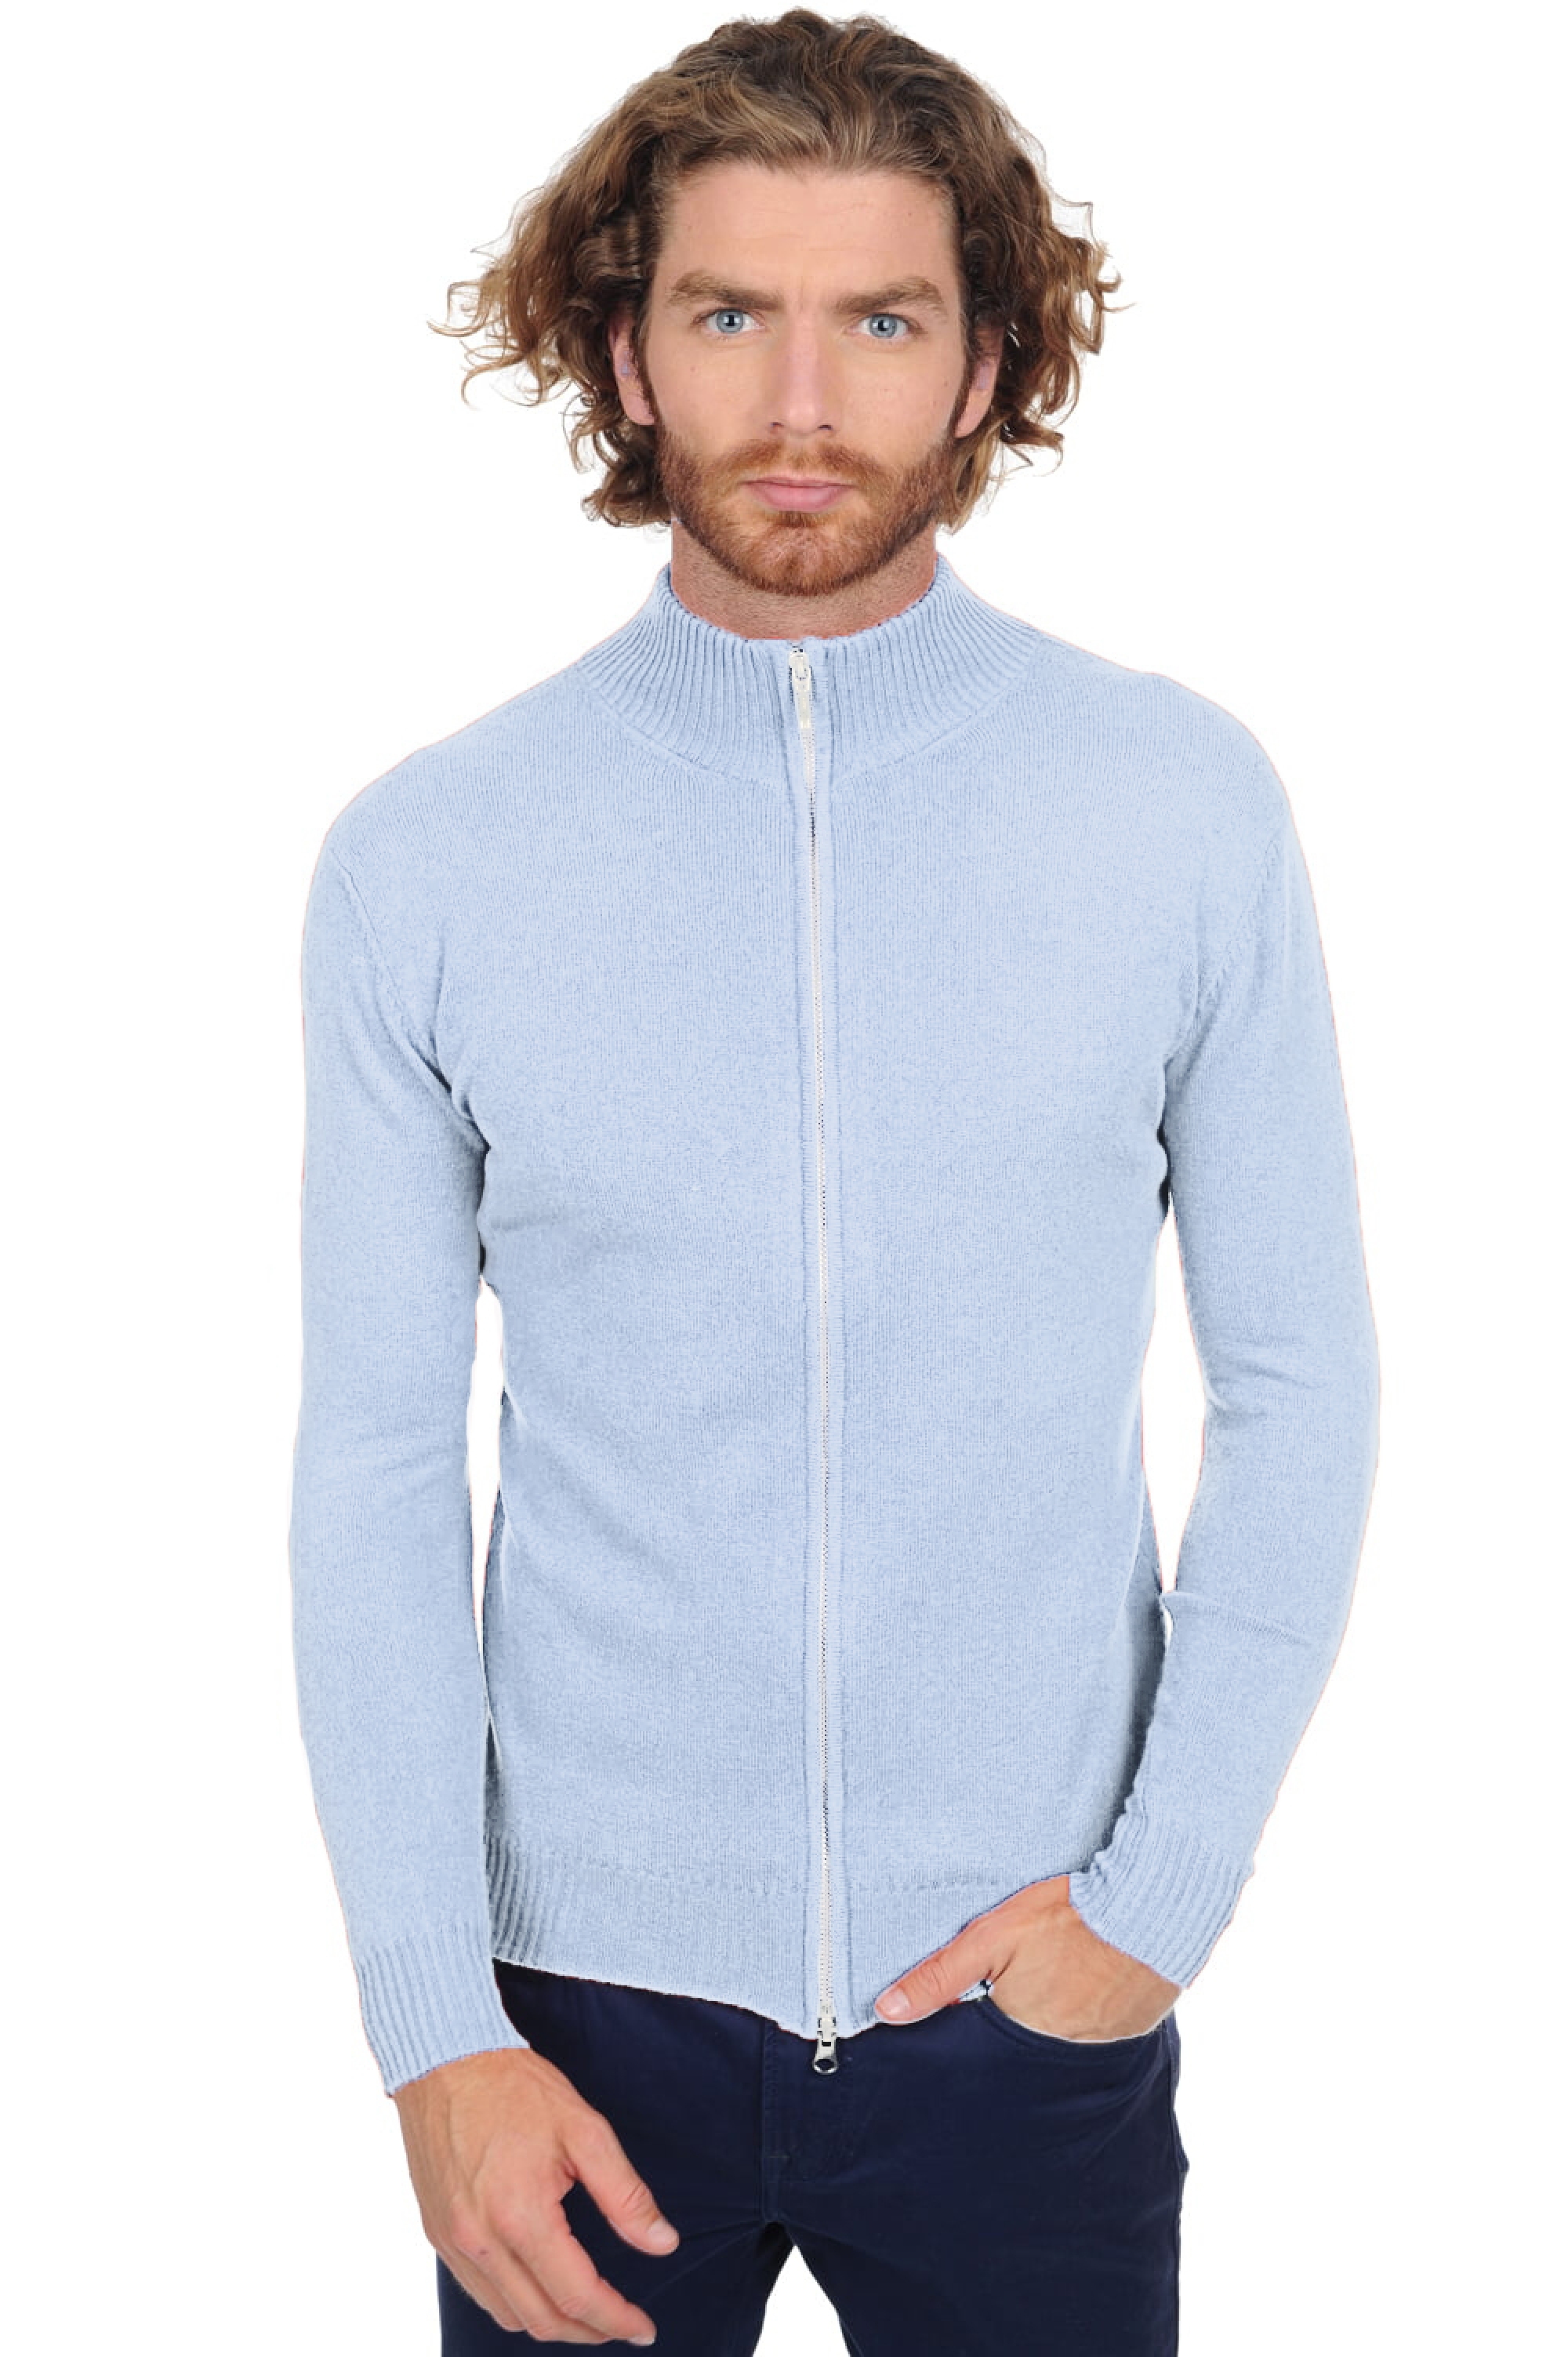 Cashmere men basic sweaters at low prices thobias first sky blue 2xl